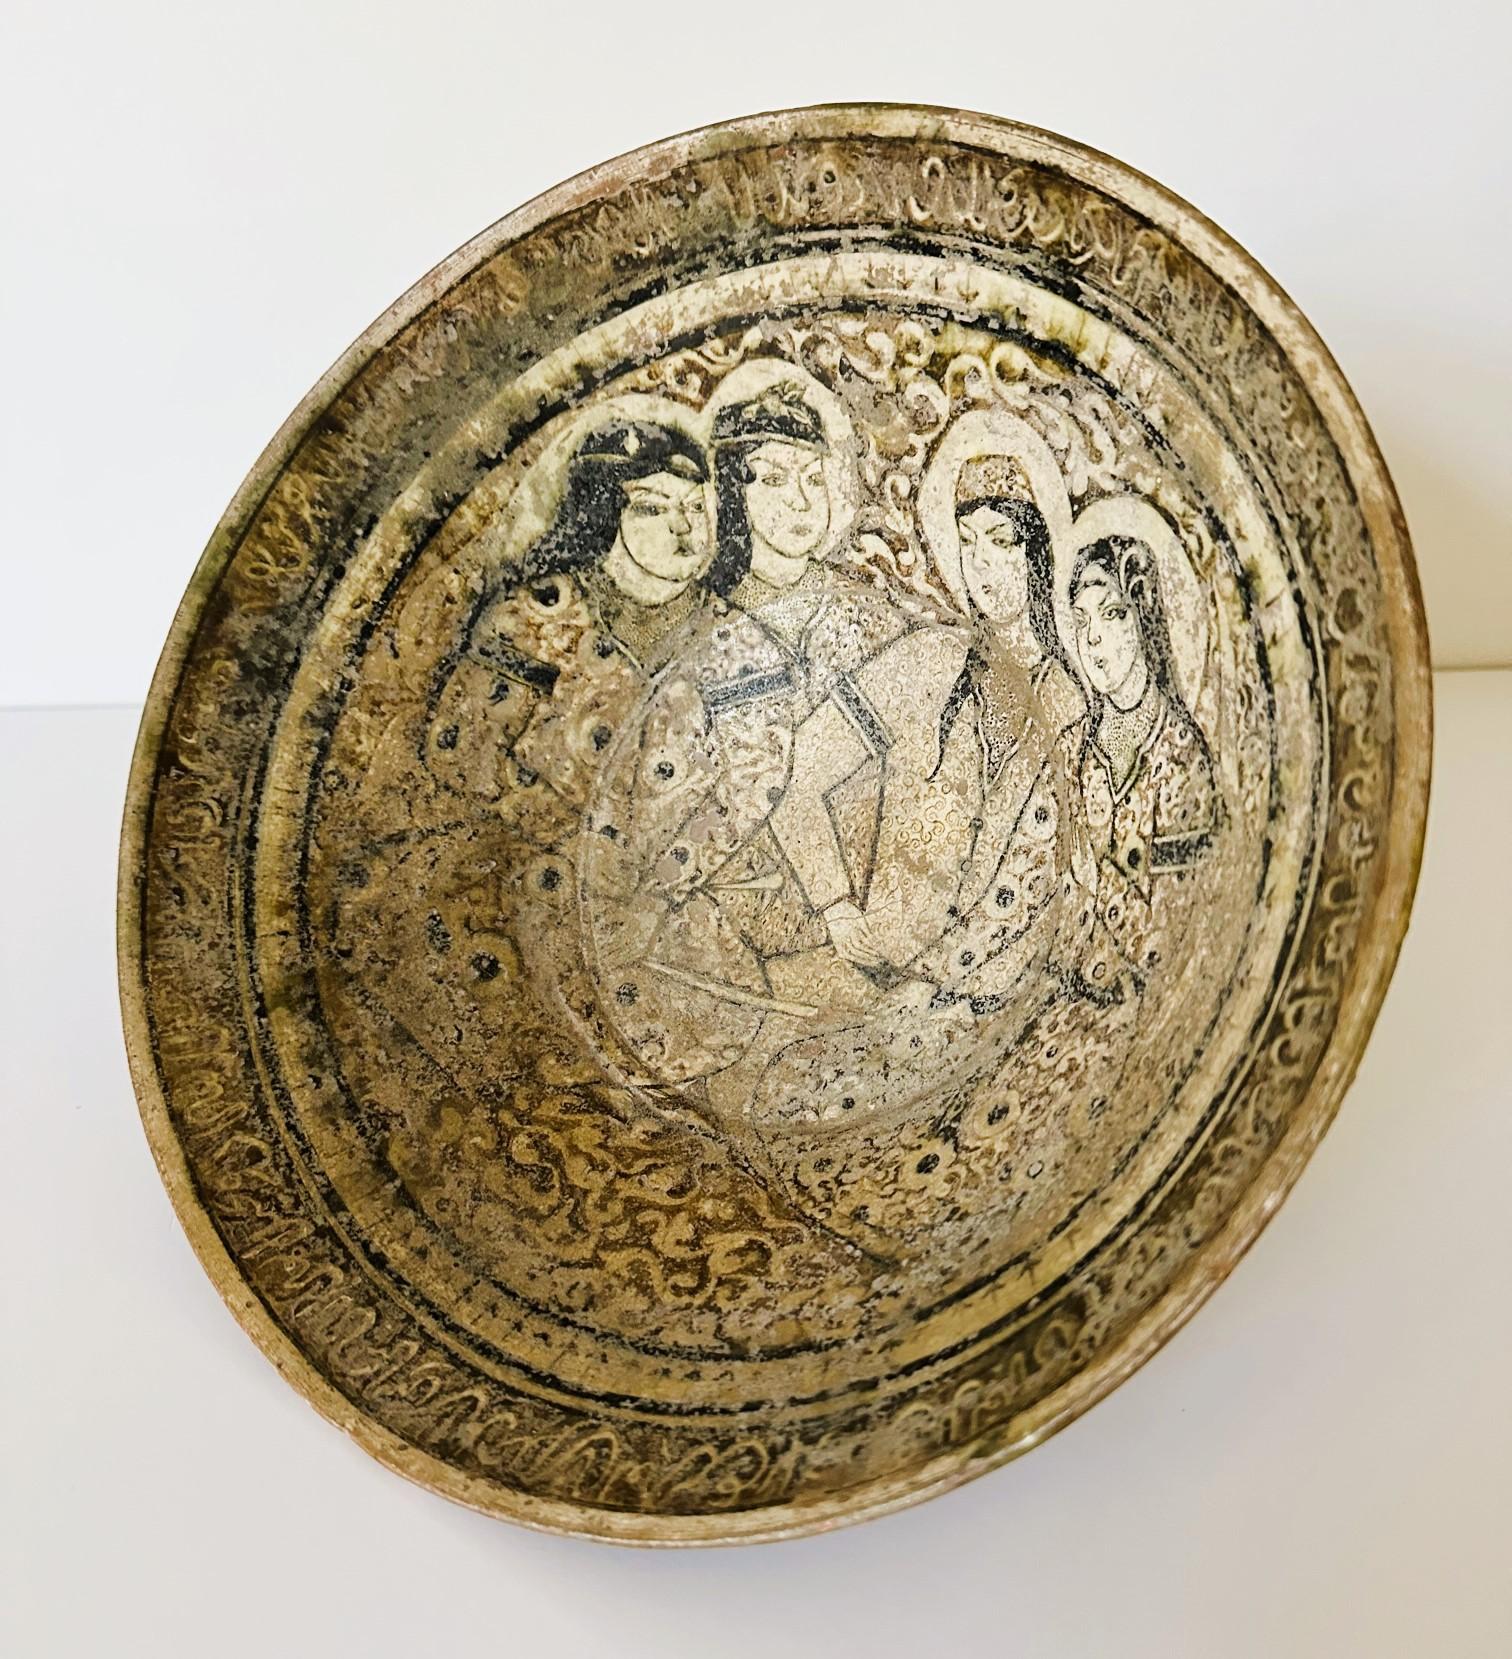 An earthenware bowl supported on a foot ring decorated with elaborate slip paint. The bowl was made in Kashan (in nowadays Iran) during 12-14th century, under Seljuk empire or after Mongols invasion. The likely frit ware bowl features a thinly